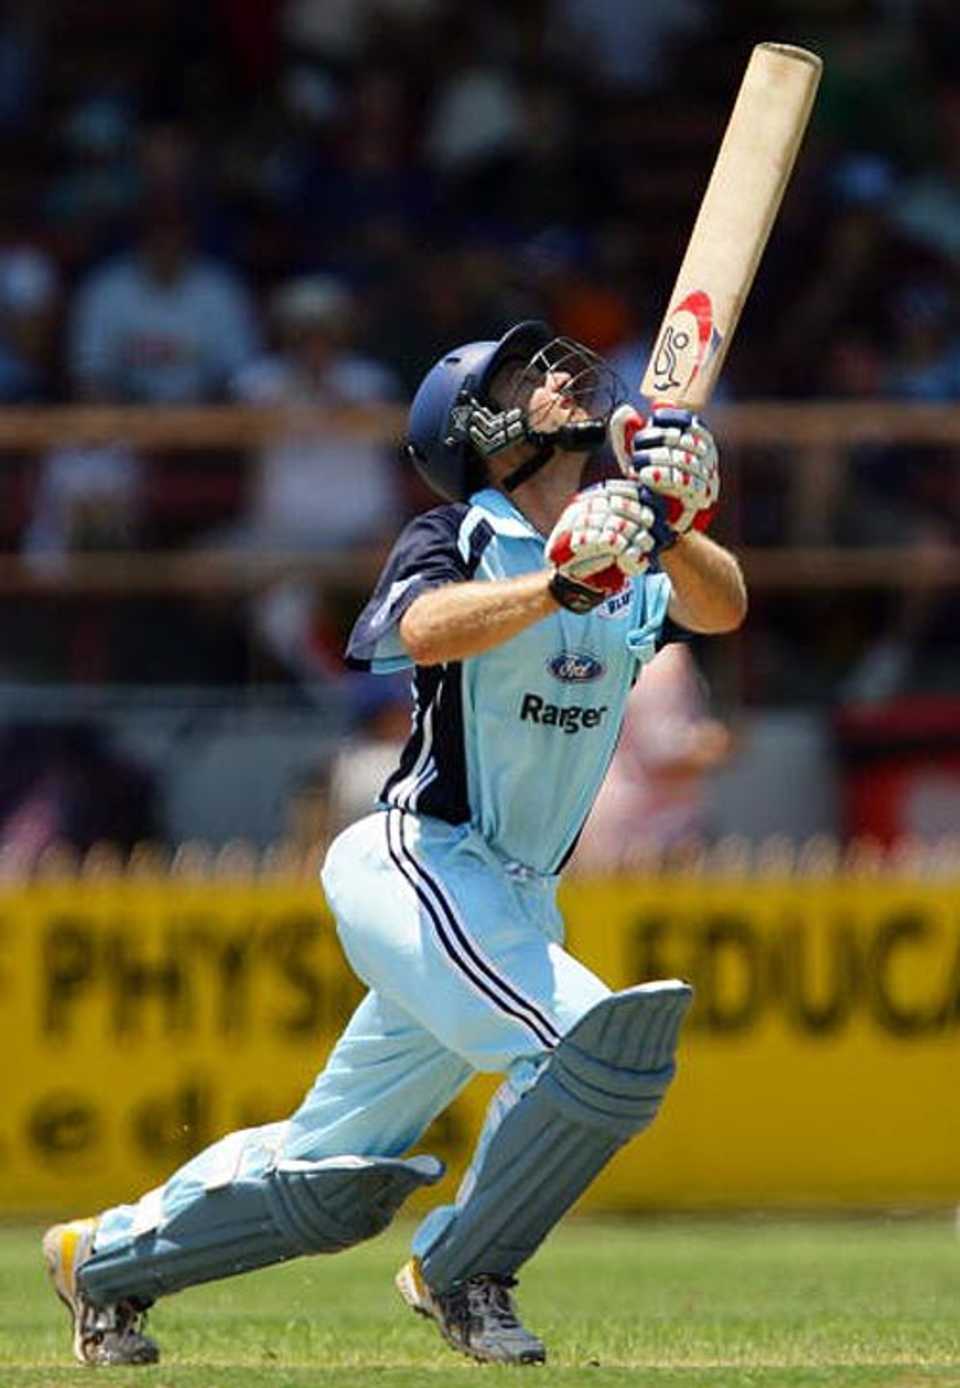 Simon Katich skies a ball during his innings of 56